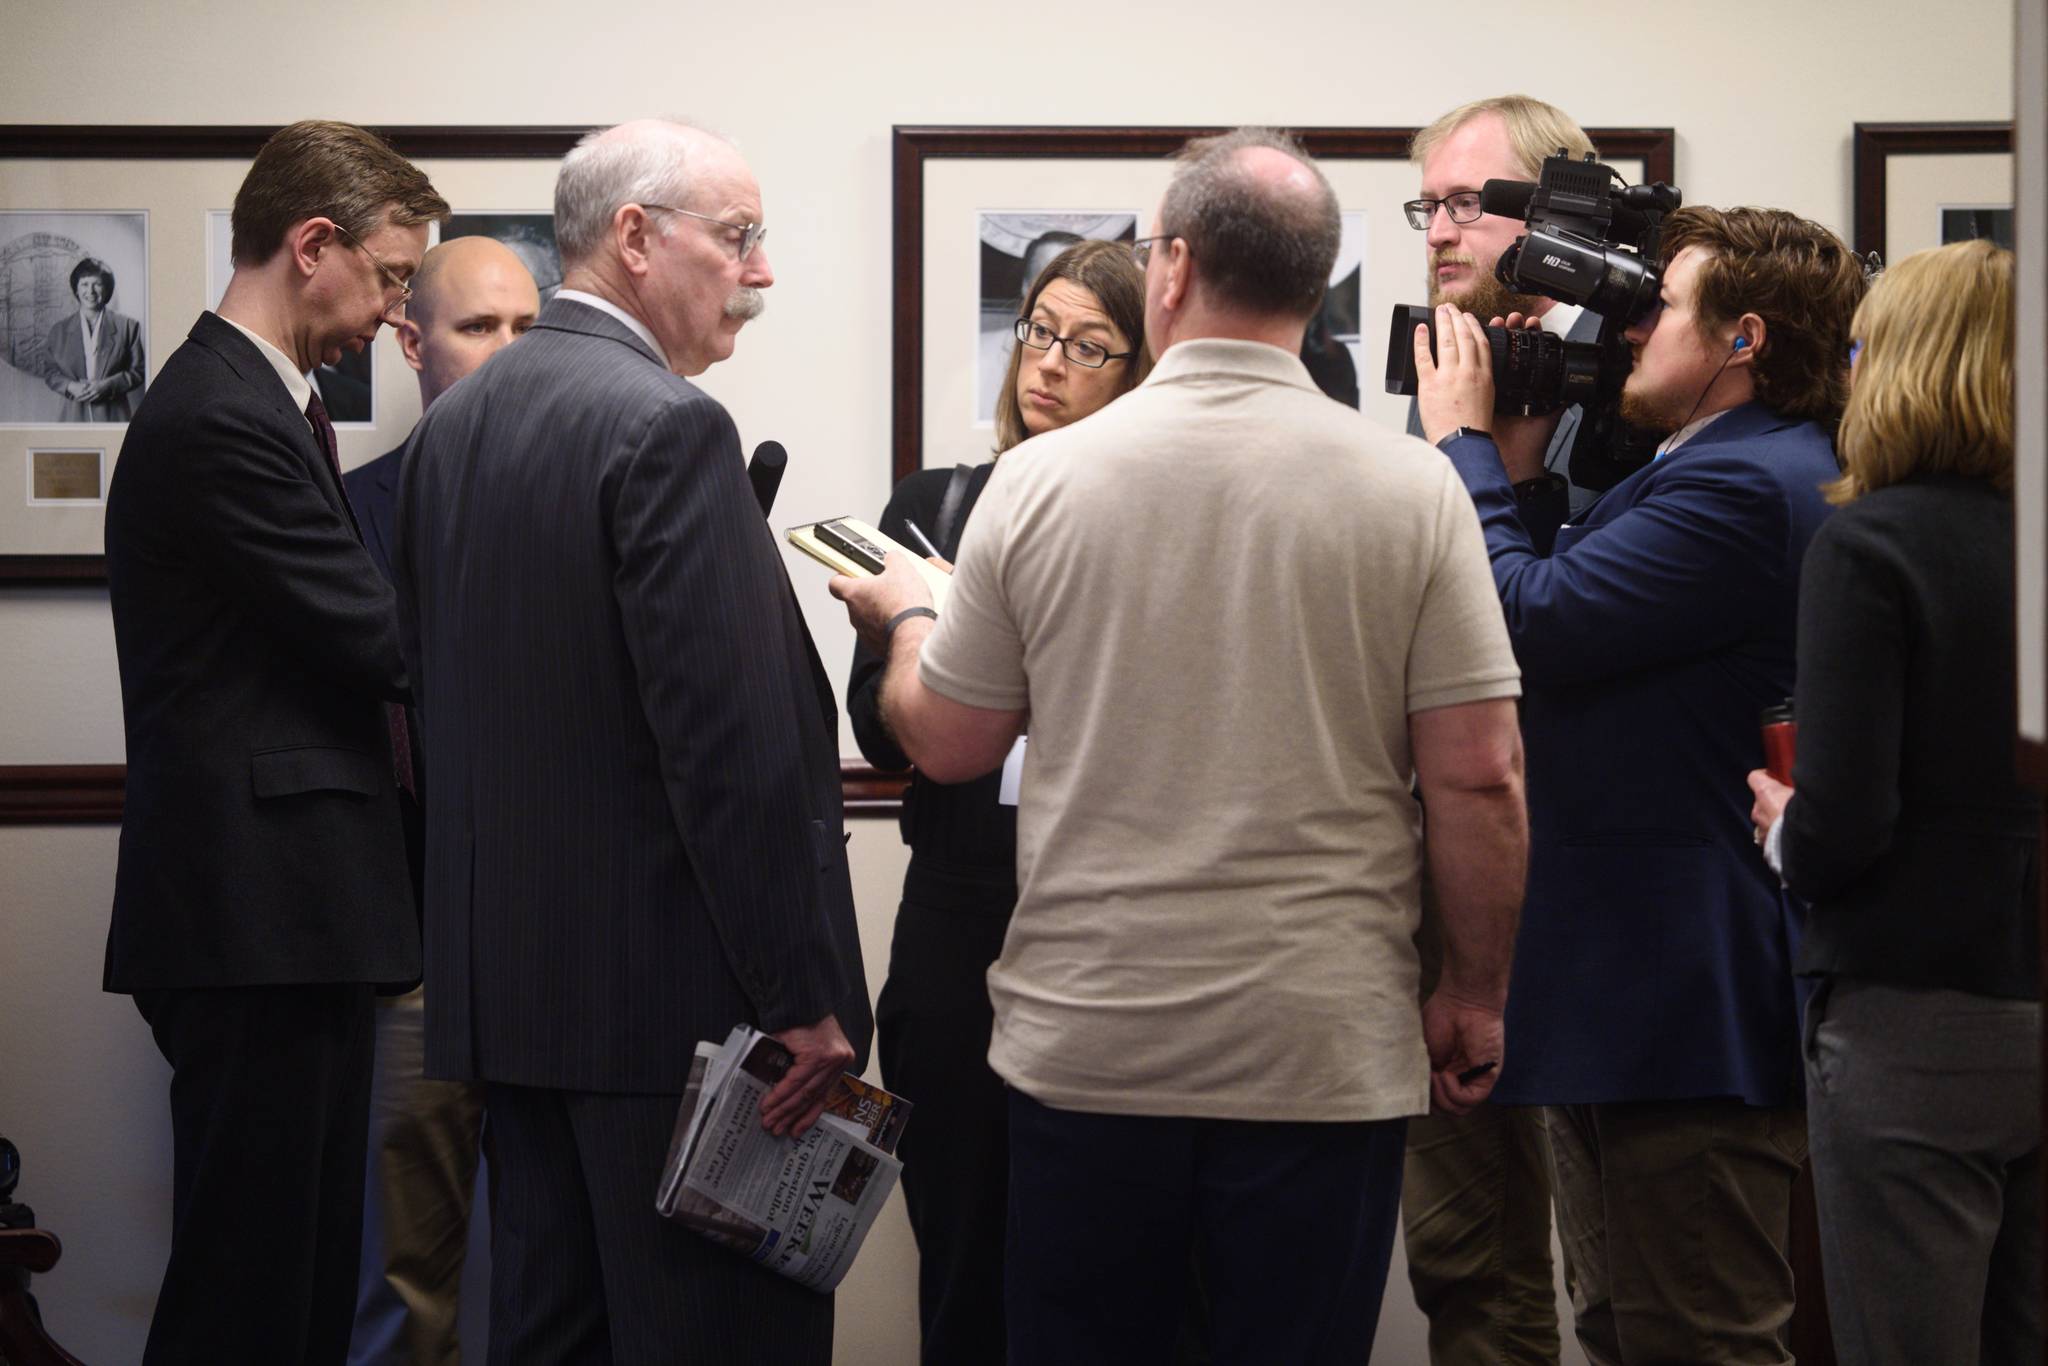 Sen. Bert Stedman, R-Sitka, is questioned by members of the media on the operating budget and the future of the Permanent Fund Dividend after a morning senate session at the Capitol on Monday, June 10, 2019. (Michael Penn | Juneau Empire)